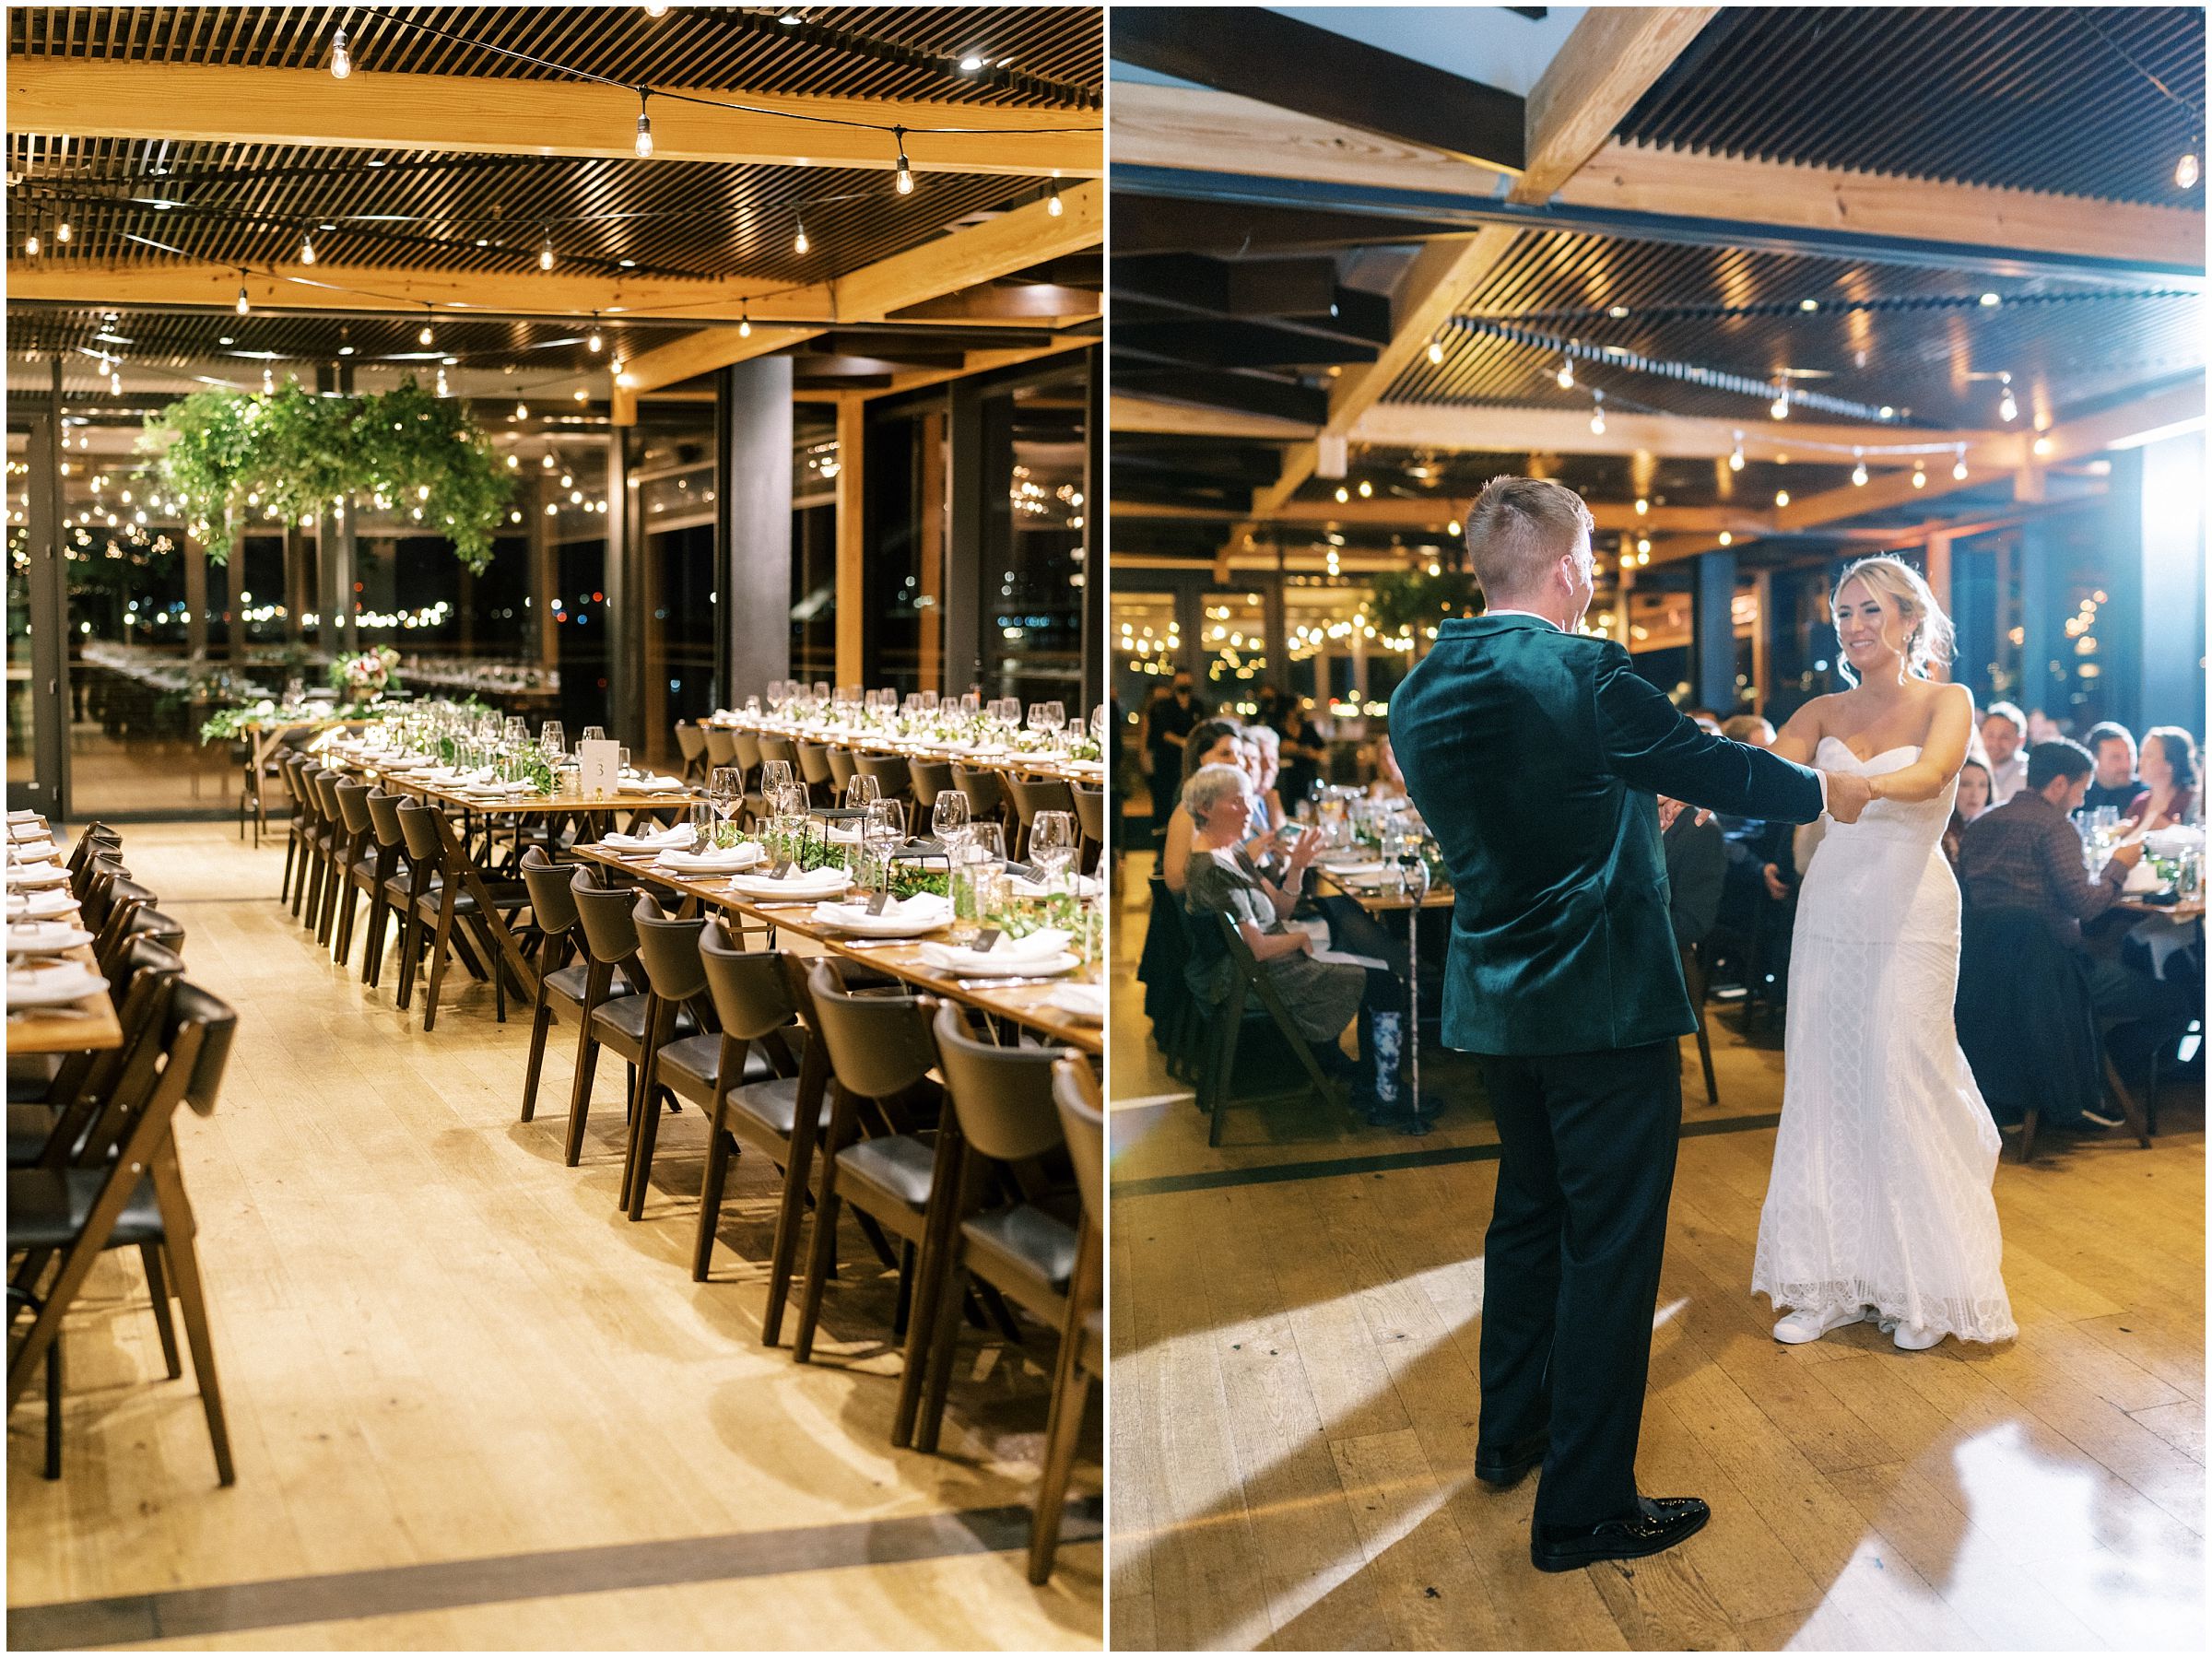 Winter wedding reception at District Winery in Washington DC